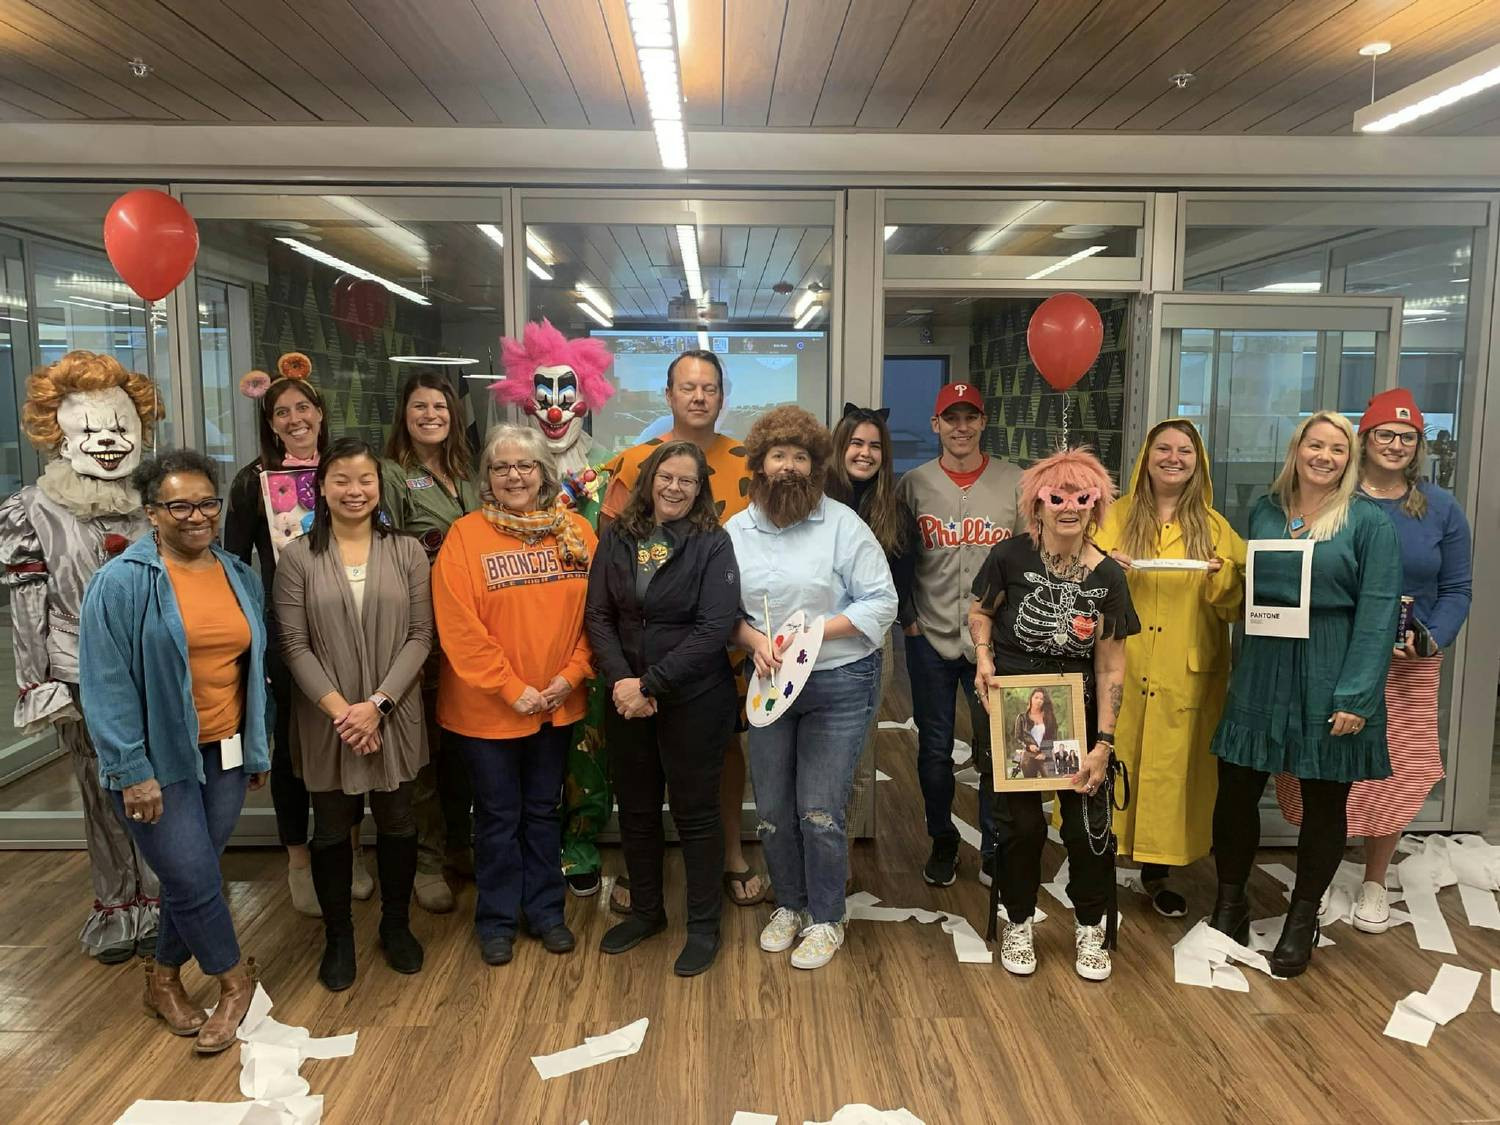 We celebrate Halloween with chili and a costume contest every year in our Denver office!